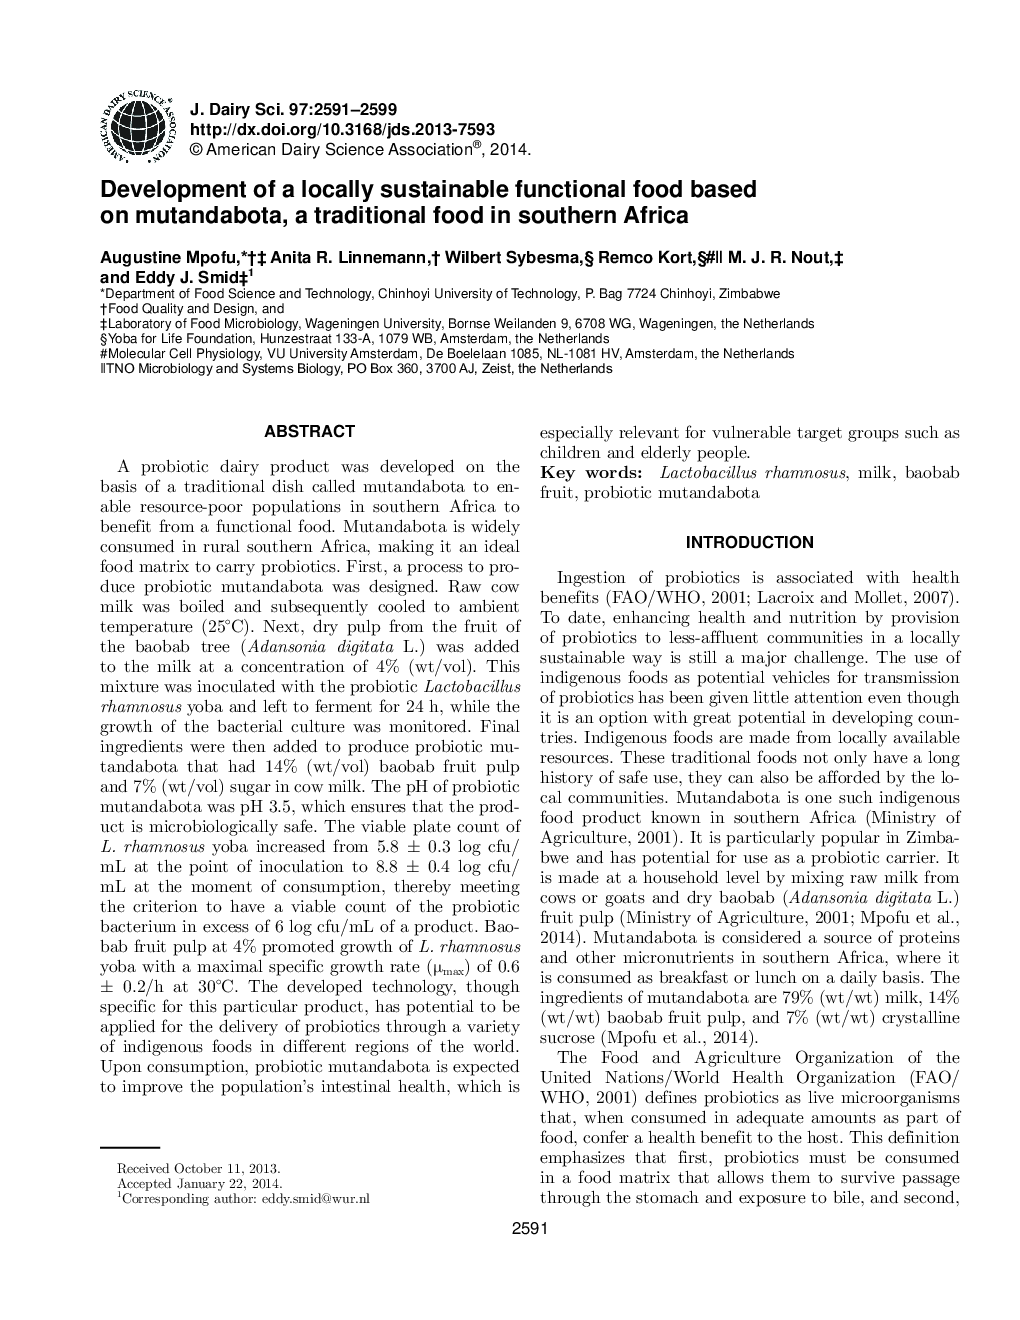 Development of a locally sustainable functional food based on mutandabota, a traditional food in southern Africa